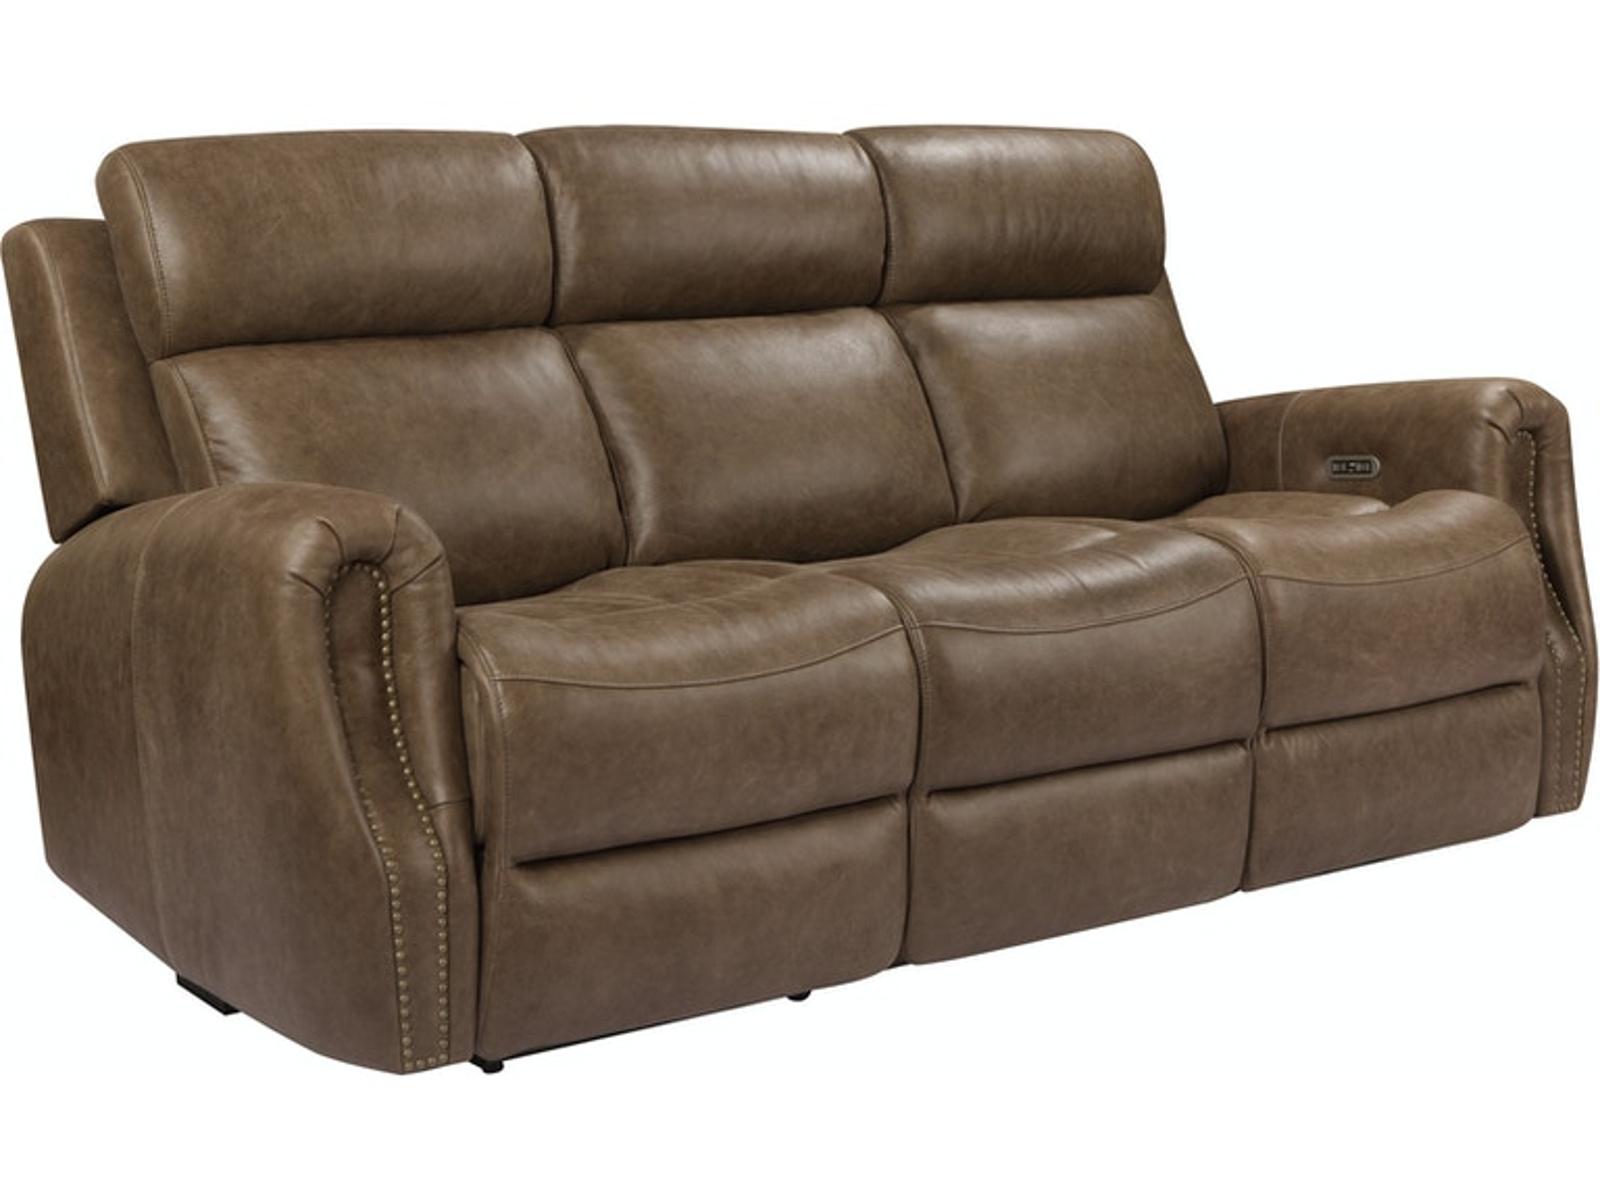 Pulaski Furniture Riley Power Recline with Power Headrest Sofa in Antique Gold image